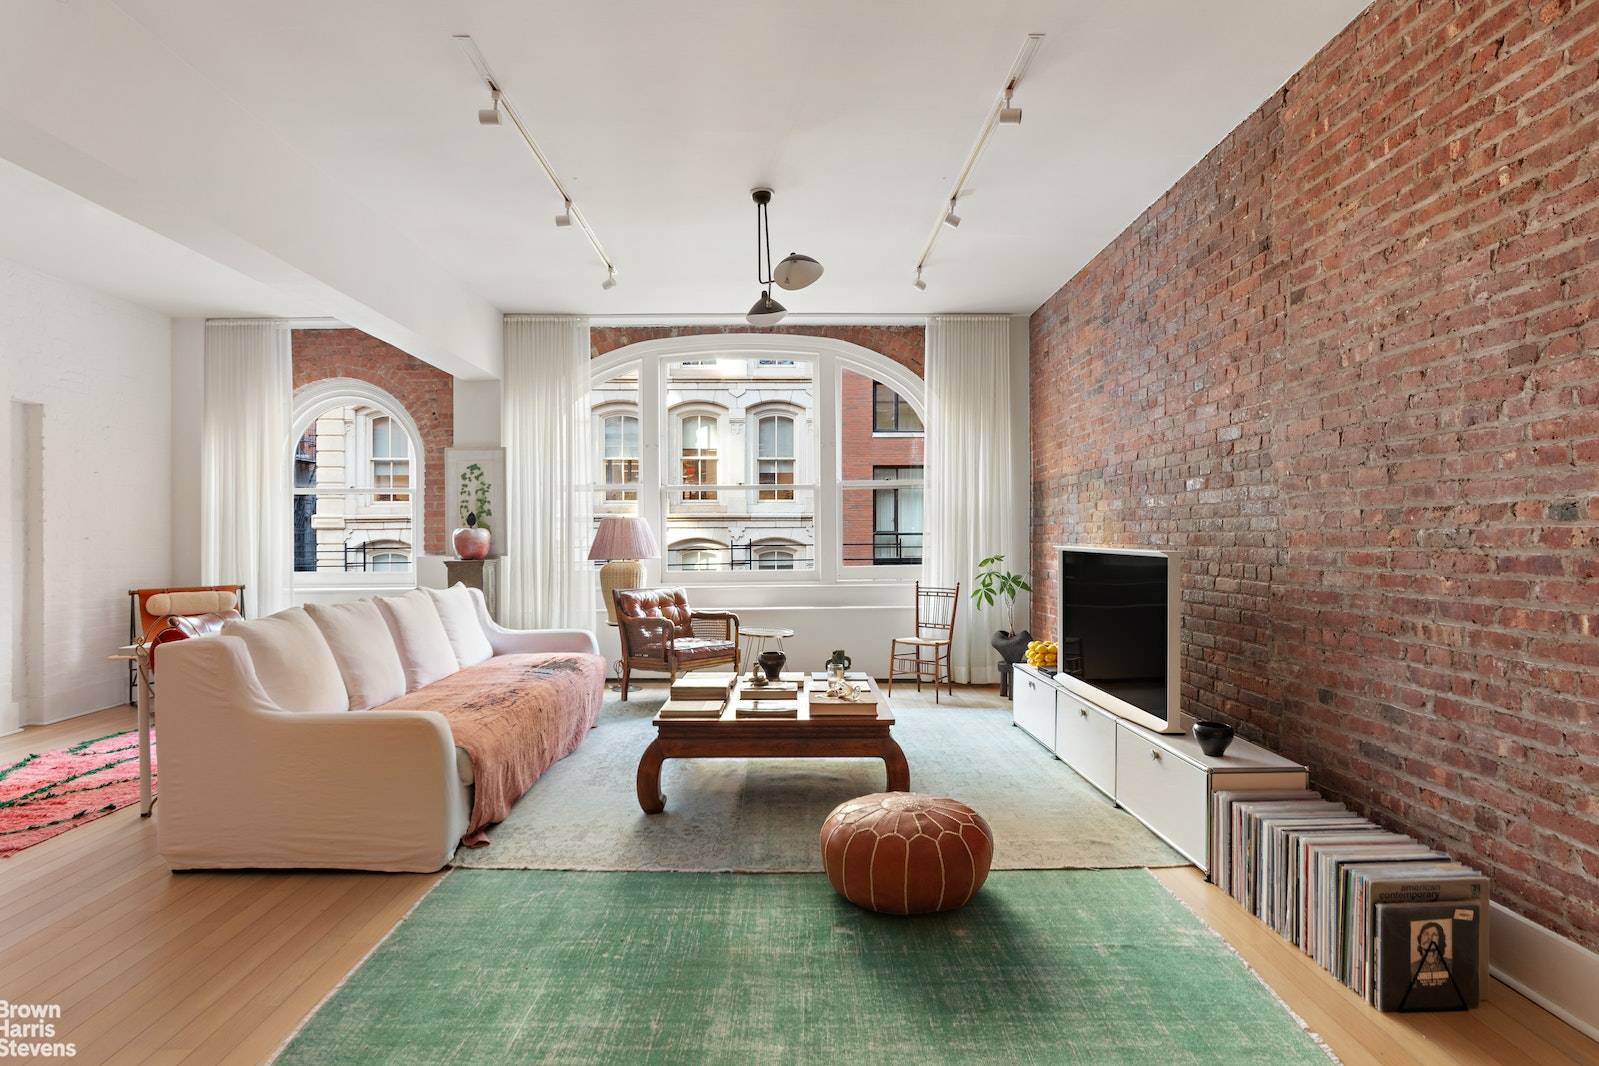 This sprawling 2, 000SF full floor loft is located in a restored 19th century warehouse and features grand proportions, superb finishes and a spacious convertible 3 bedroom layout.